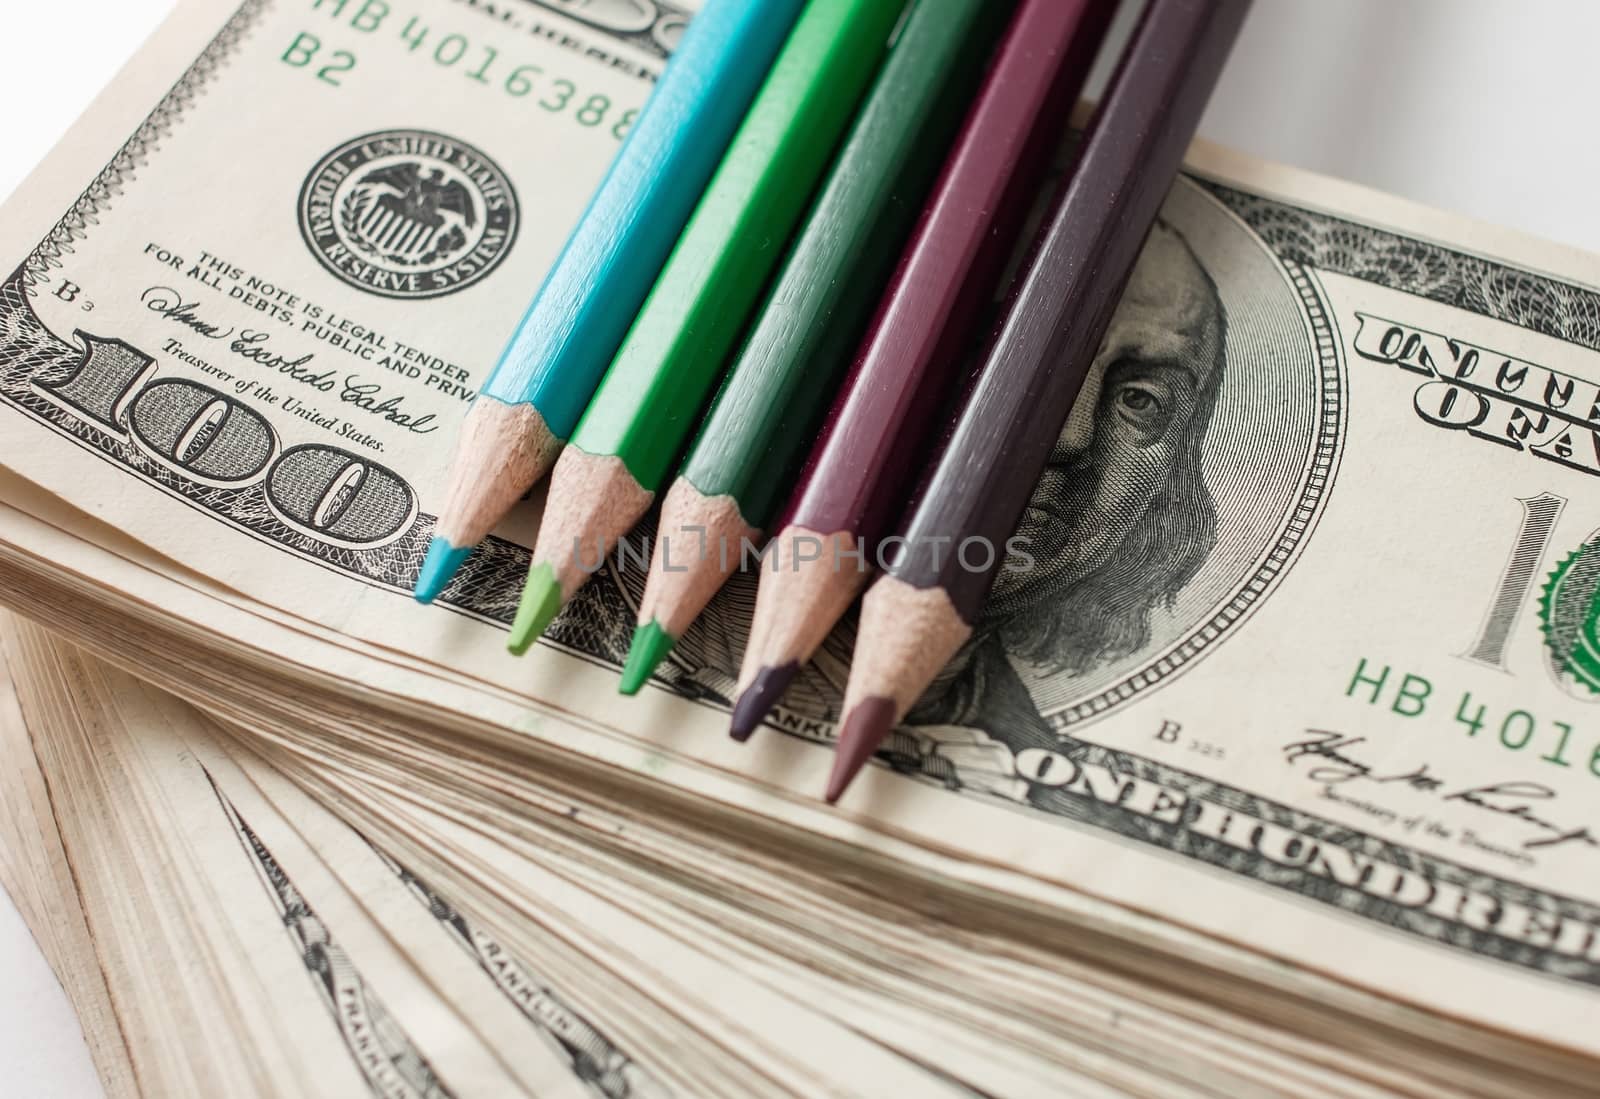 Production of counterfeit dollars, American hundred dollar stack, making counterfeit money is forbidden! Punishment - prison Creating fake dollar pencils